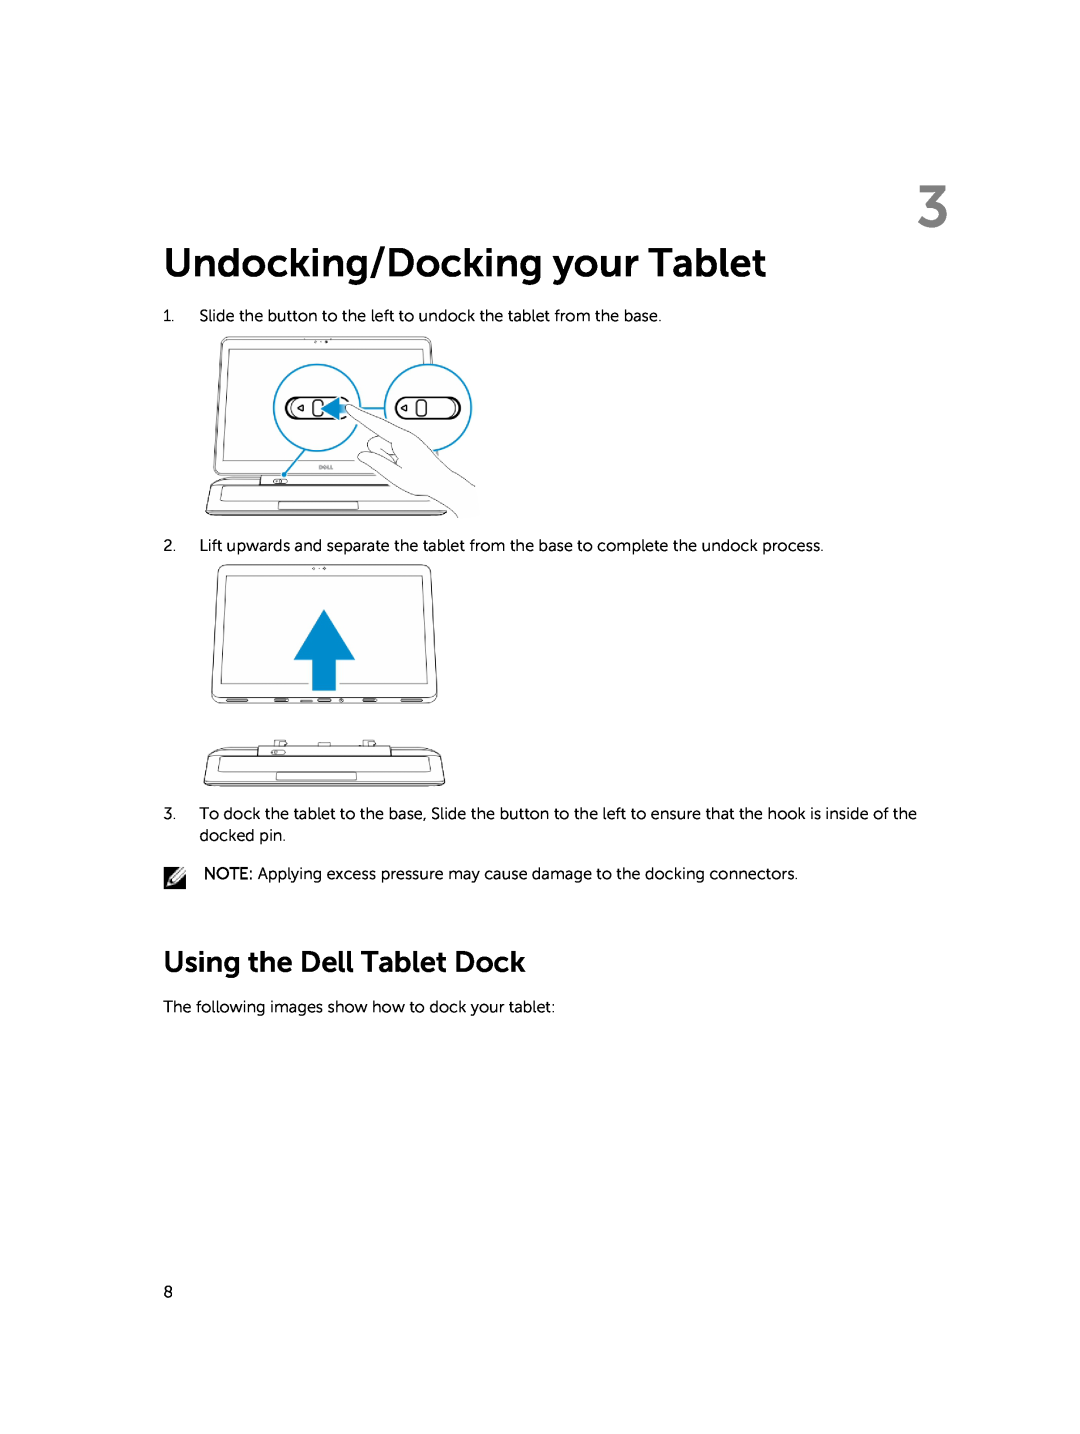 Dell 13-7350 manual Undocking/Docking your Tablet, Using the Dell Tablet Dock 